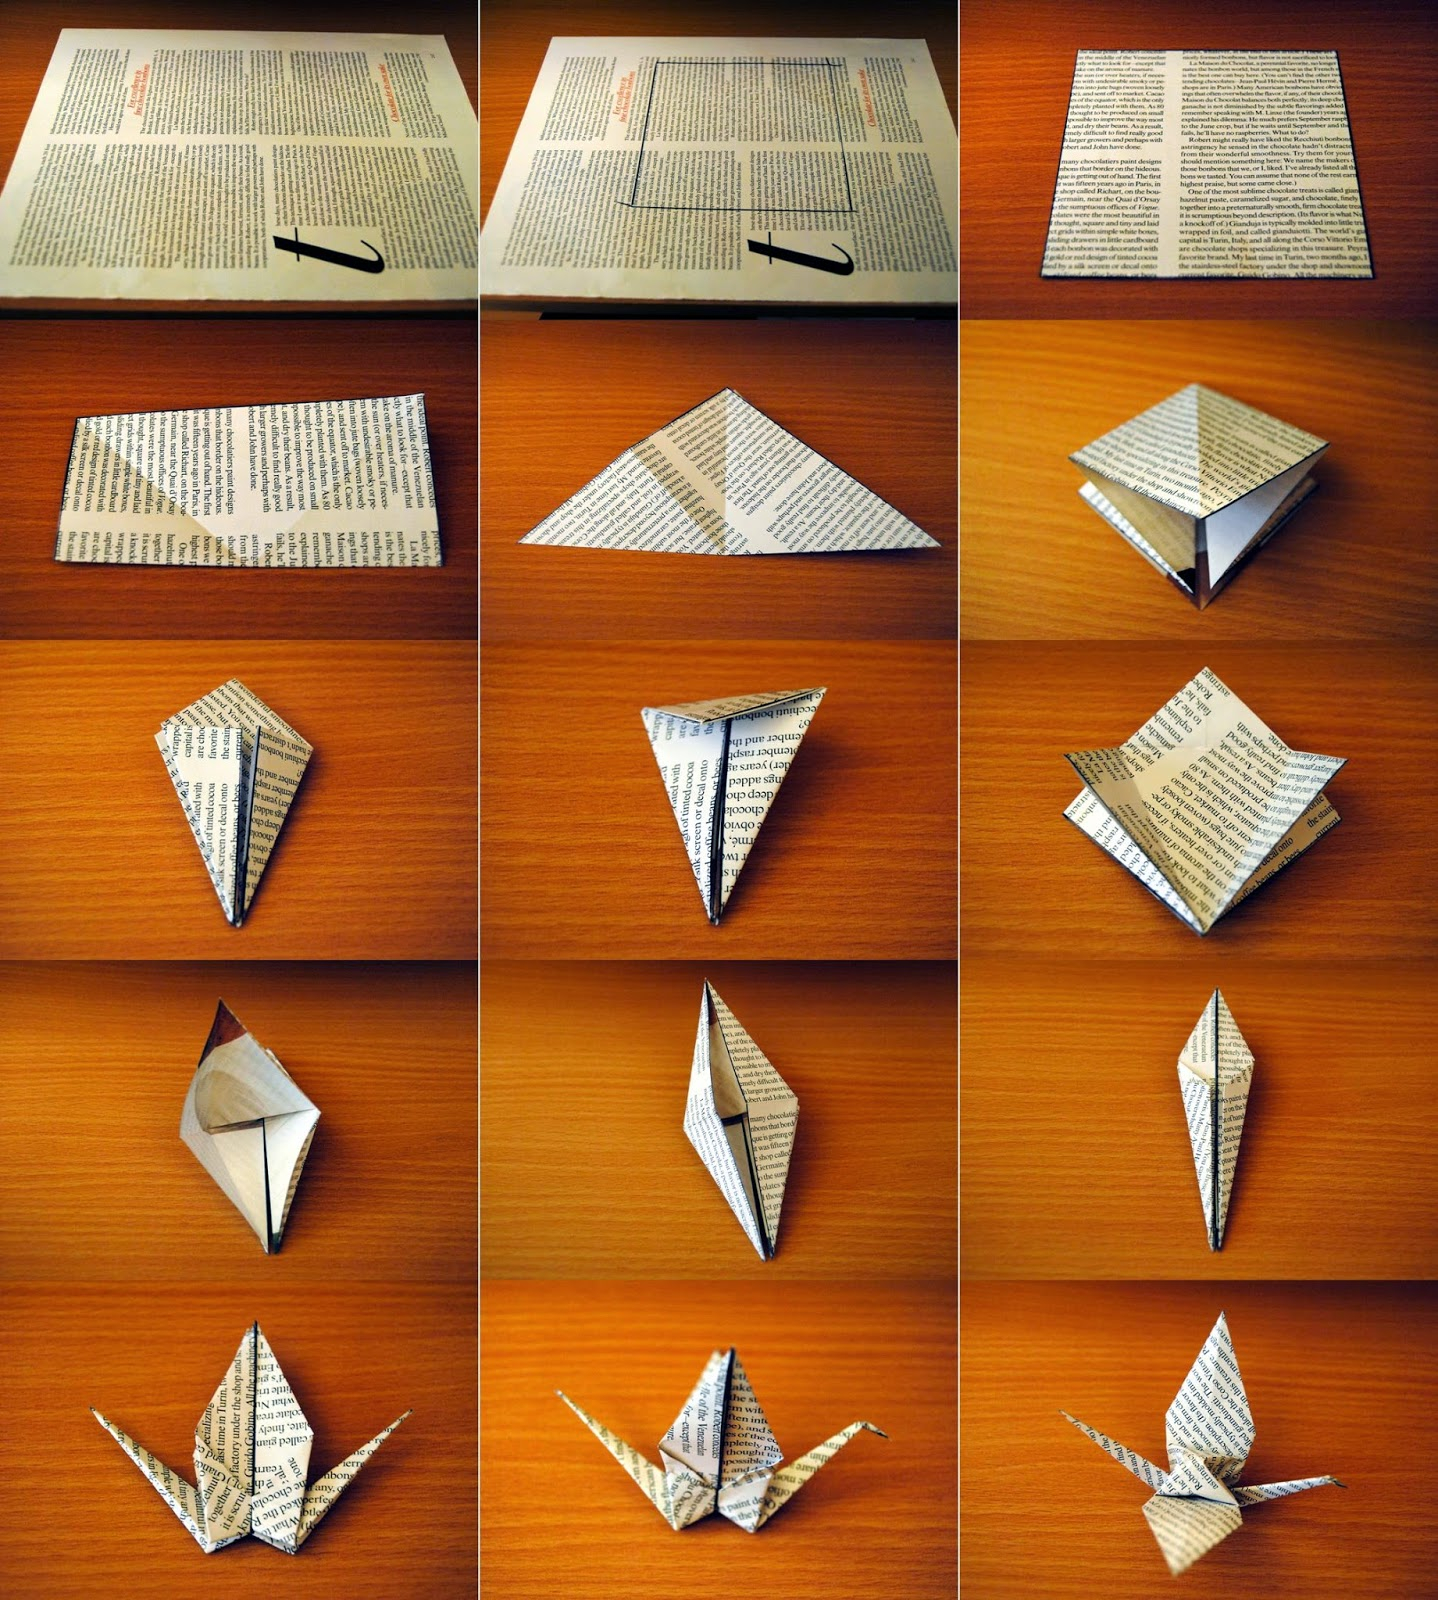 Origami Crane Step By Step Instructions How To Make An Origami Crane Step Step Kids Origami